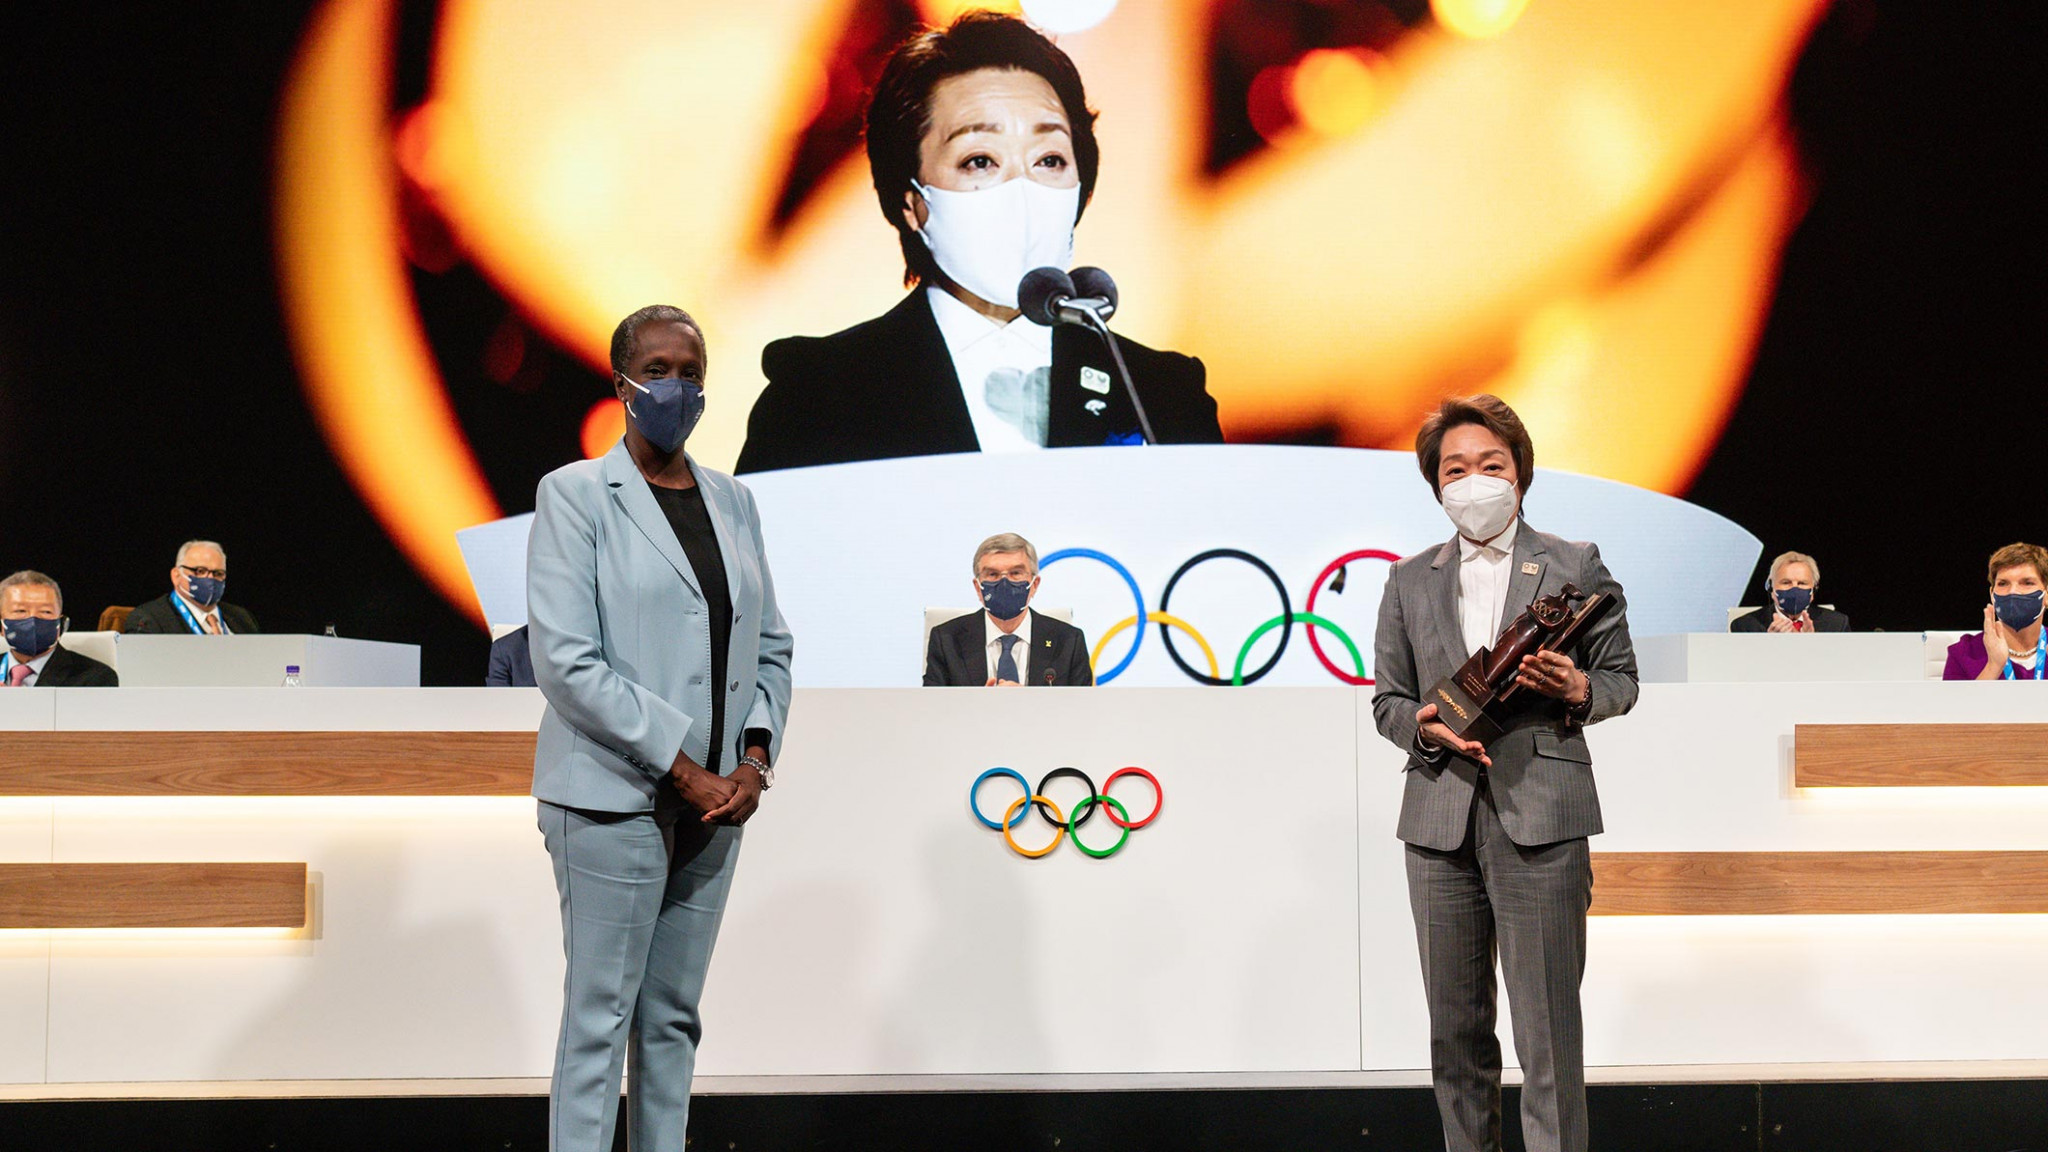 Tokyo 2020 President Seiko Hashimoto has been named as the winner of the IIOC Women and Sport Awards world prize ©IOC